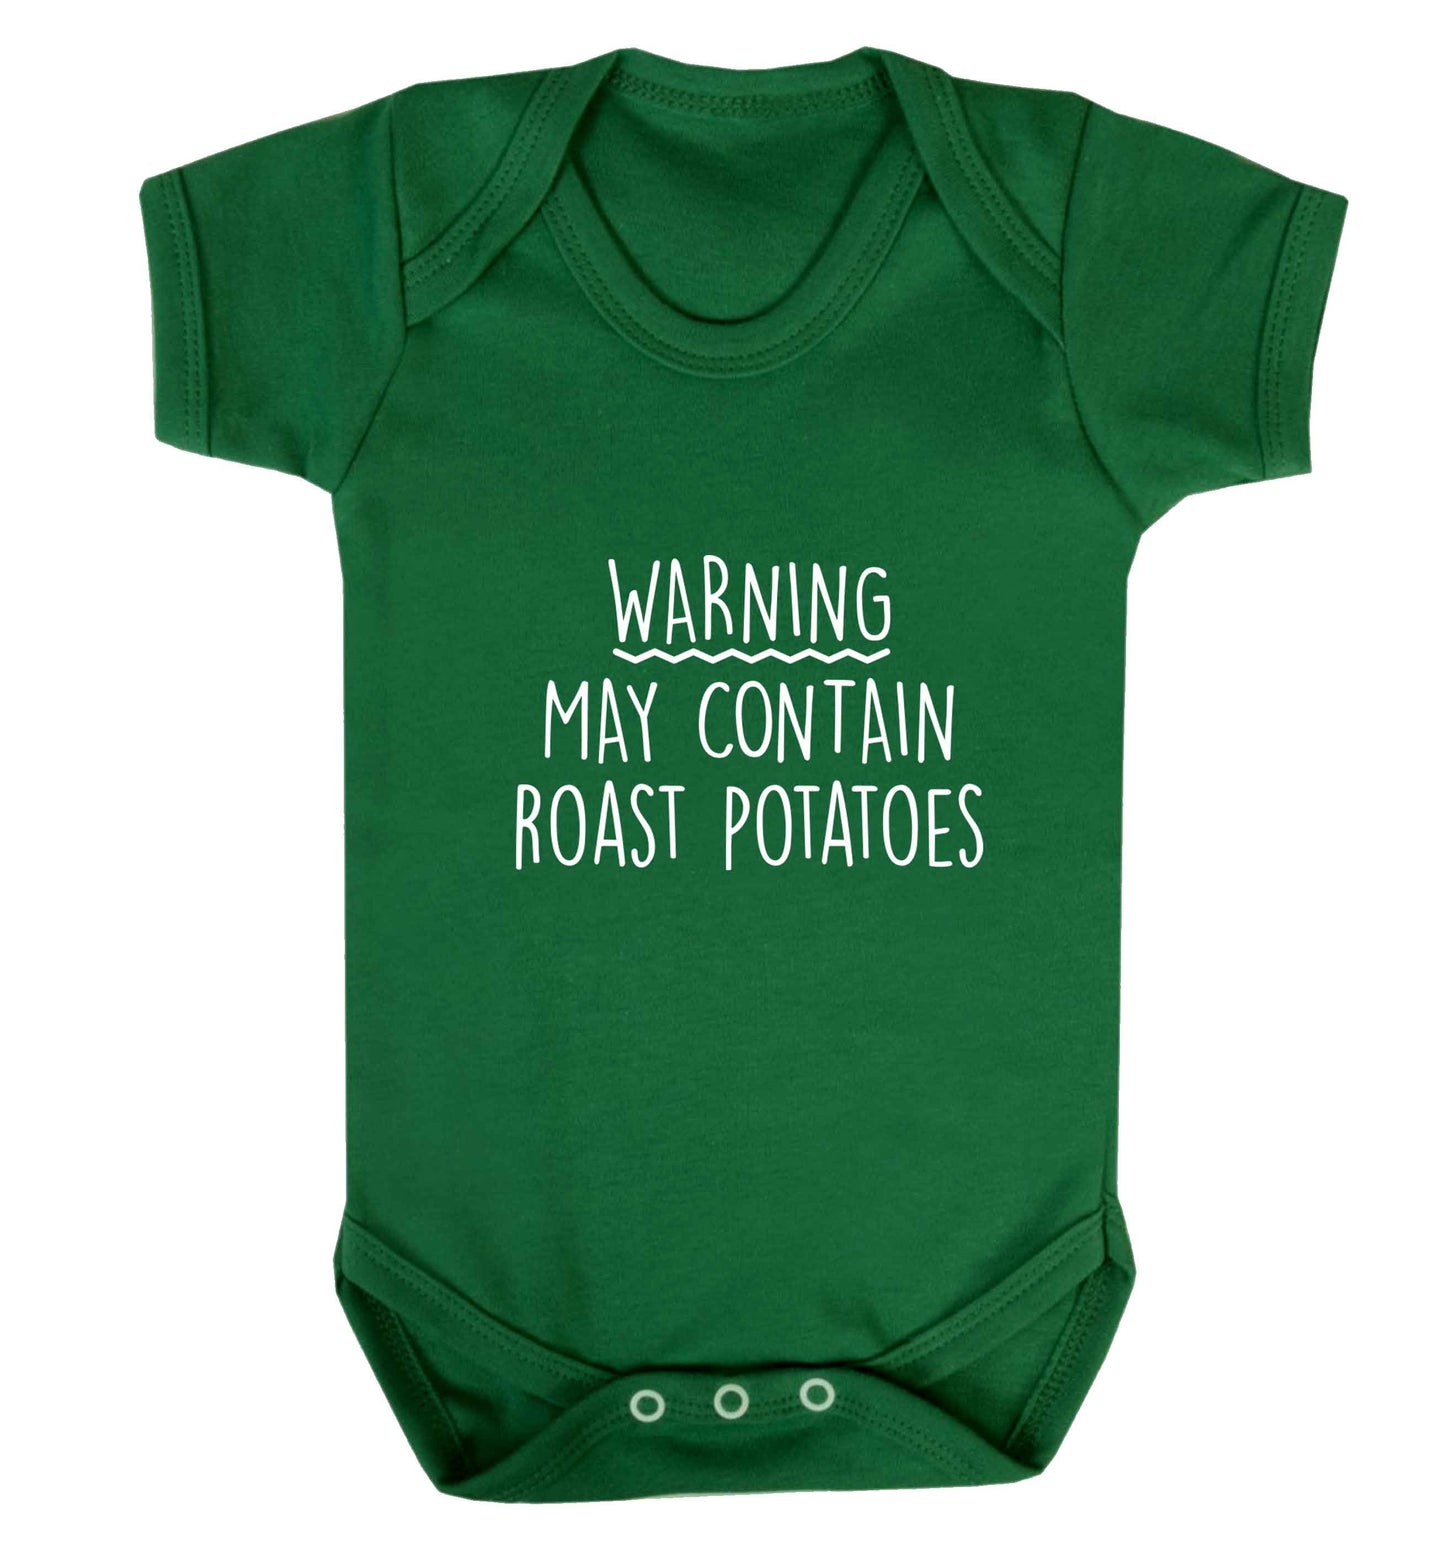 Warning may containg roast potatoes baby vest green 18-24 months